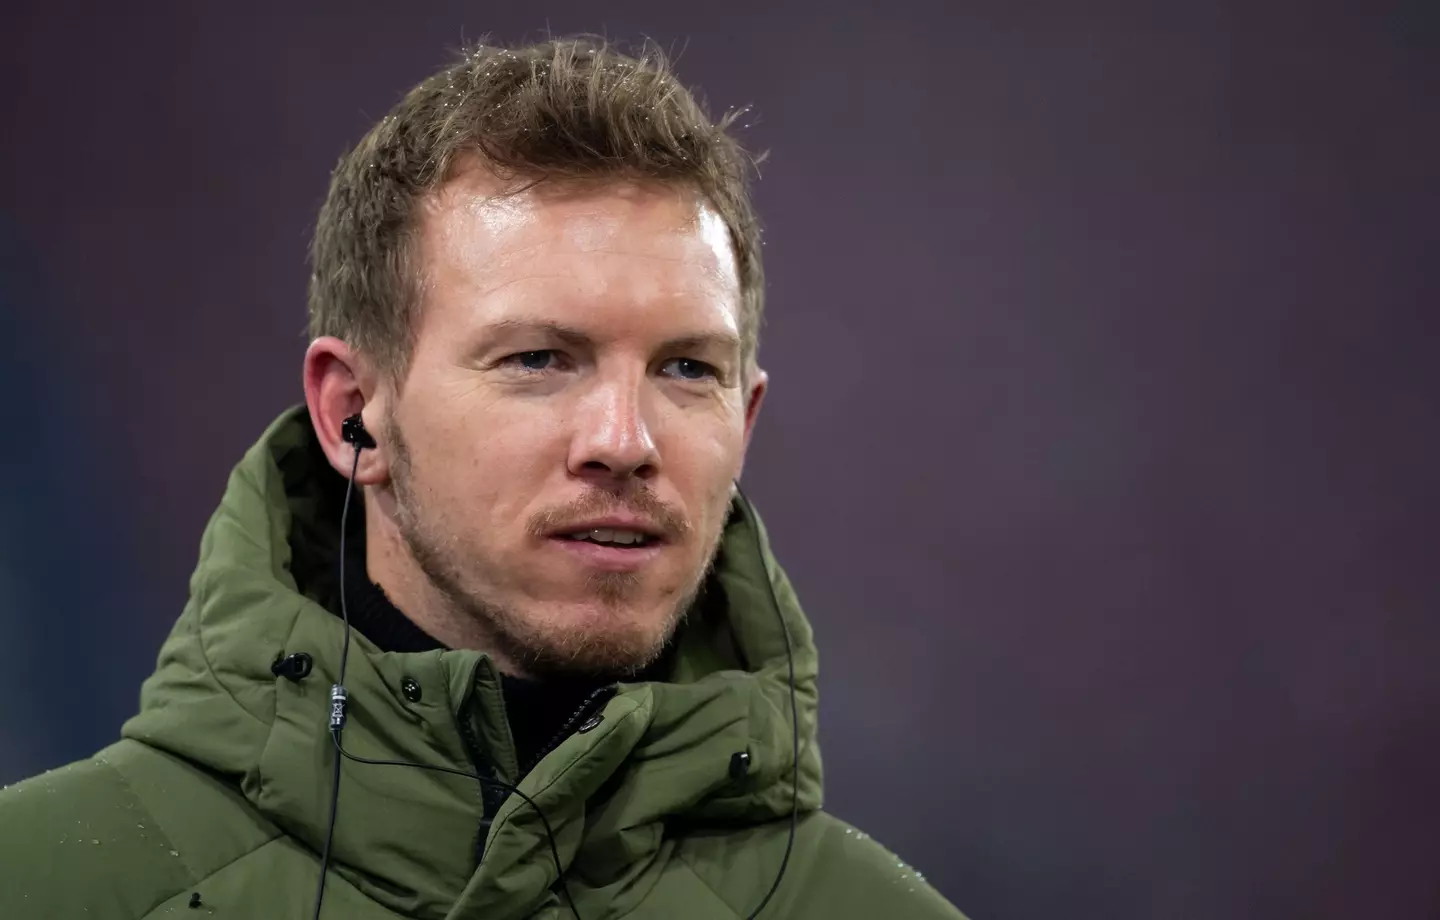 Nagelsmann took charge of Bayern Munich in July (Image: Alamy)